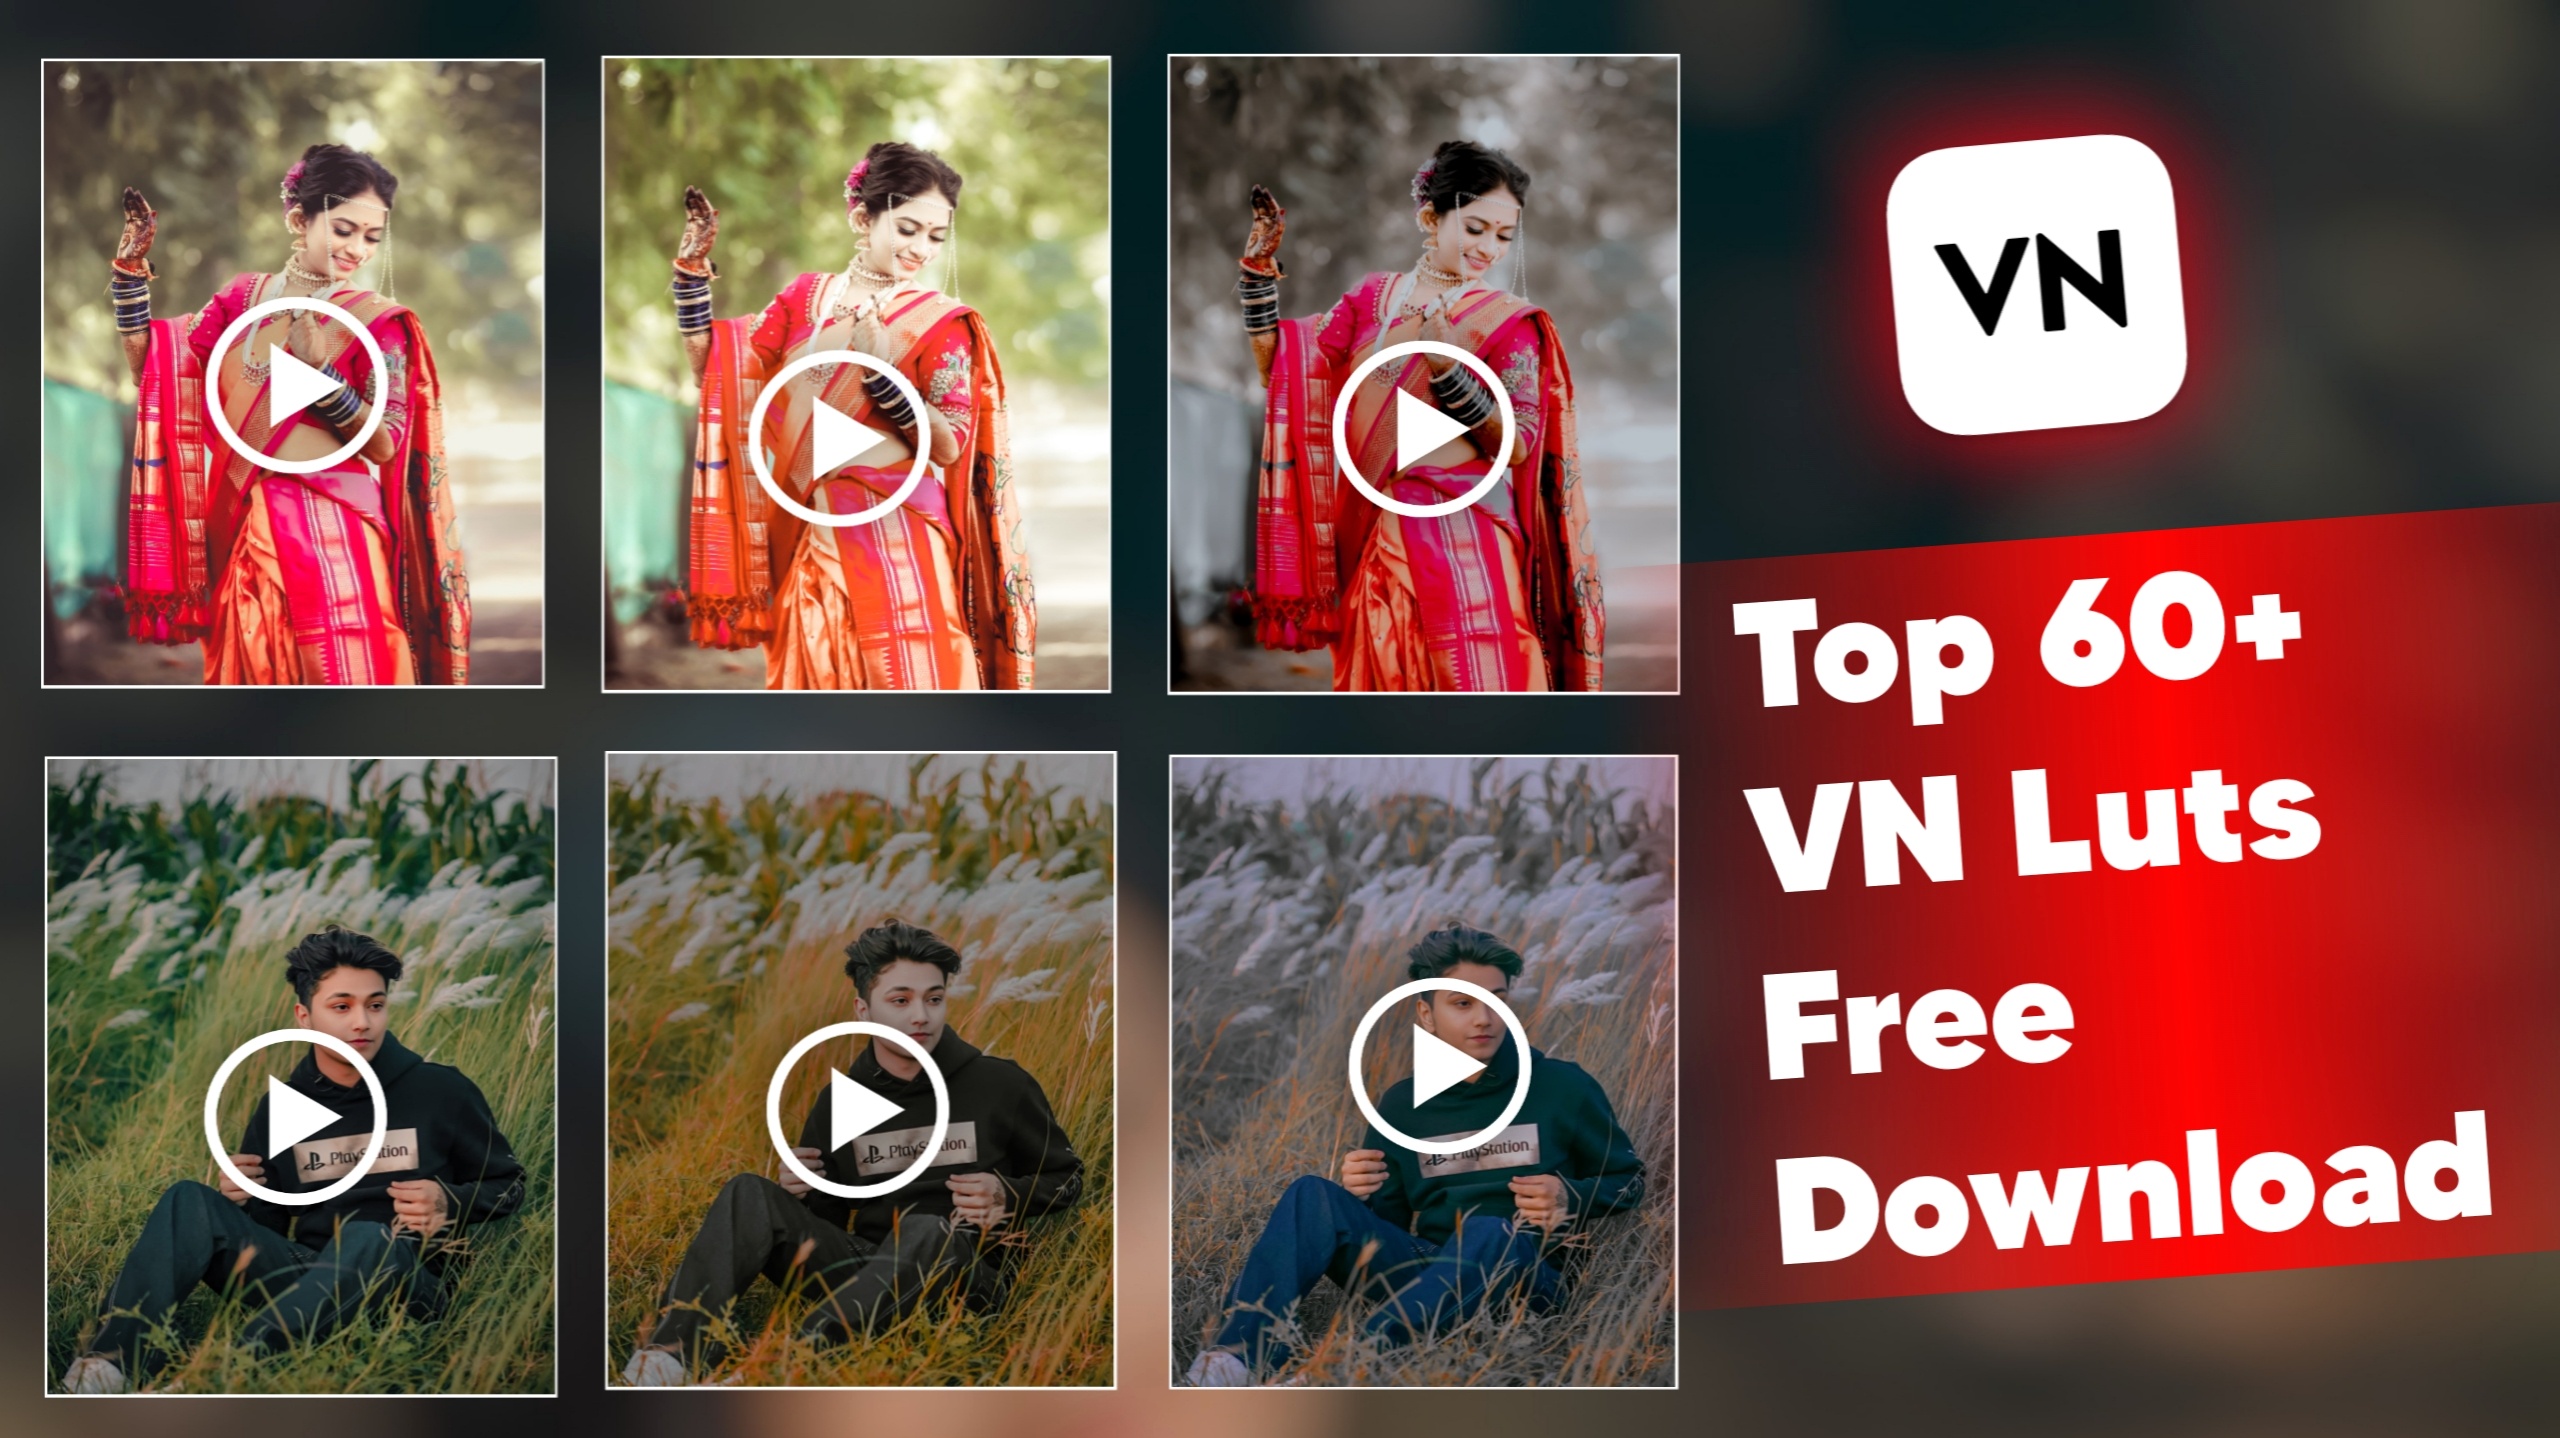 Top 60+ Vn Luts Free Download